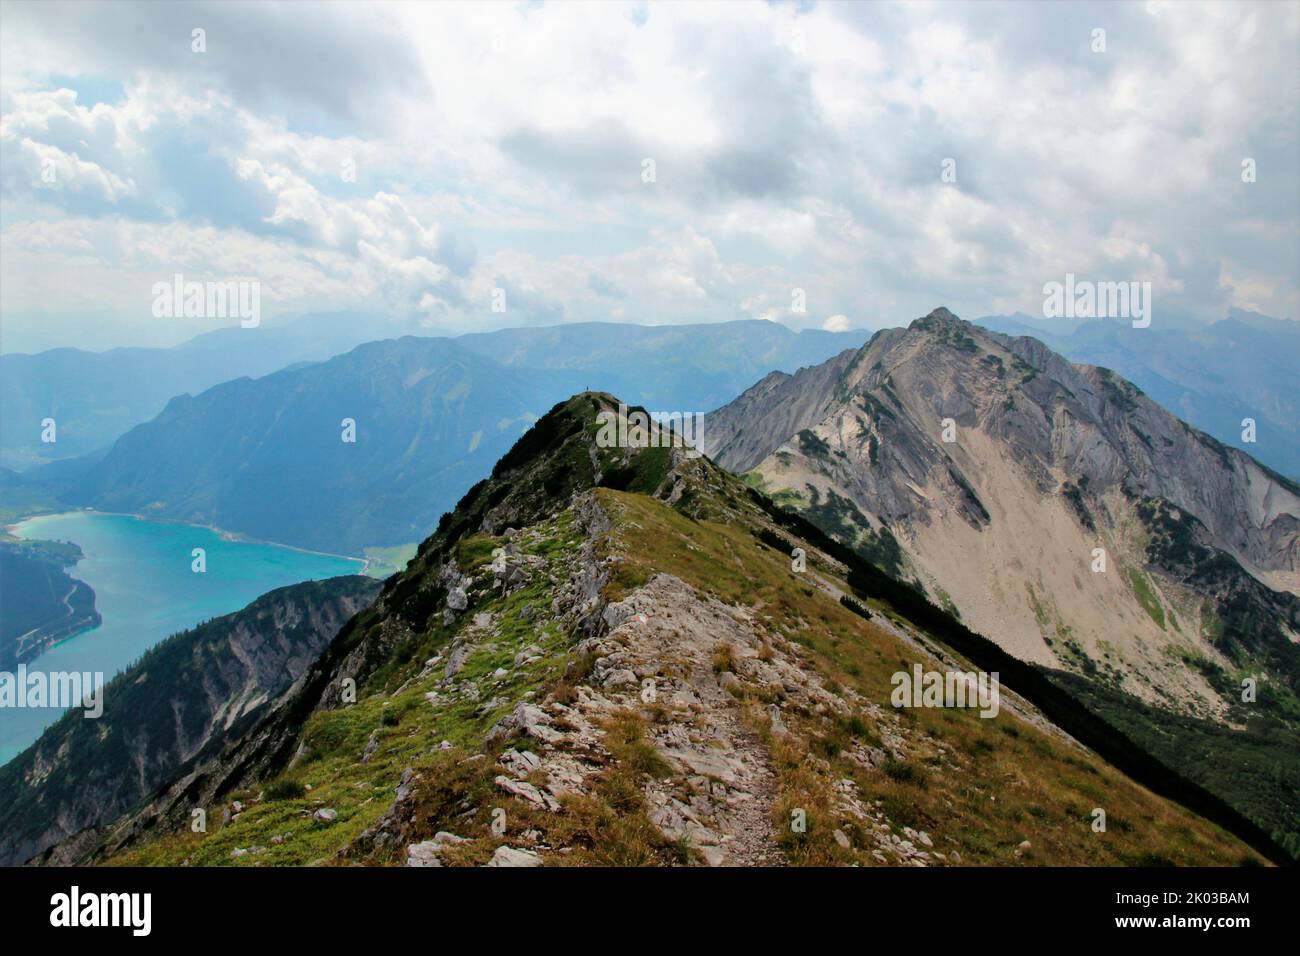 View from the Seekarspitze over the summit ridge to the Seebergspitze (2085m) in the background, view of the Achensee, Tyrol, Austria Stock Photo